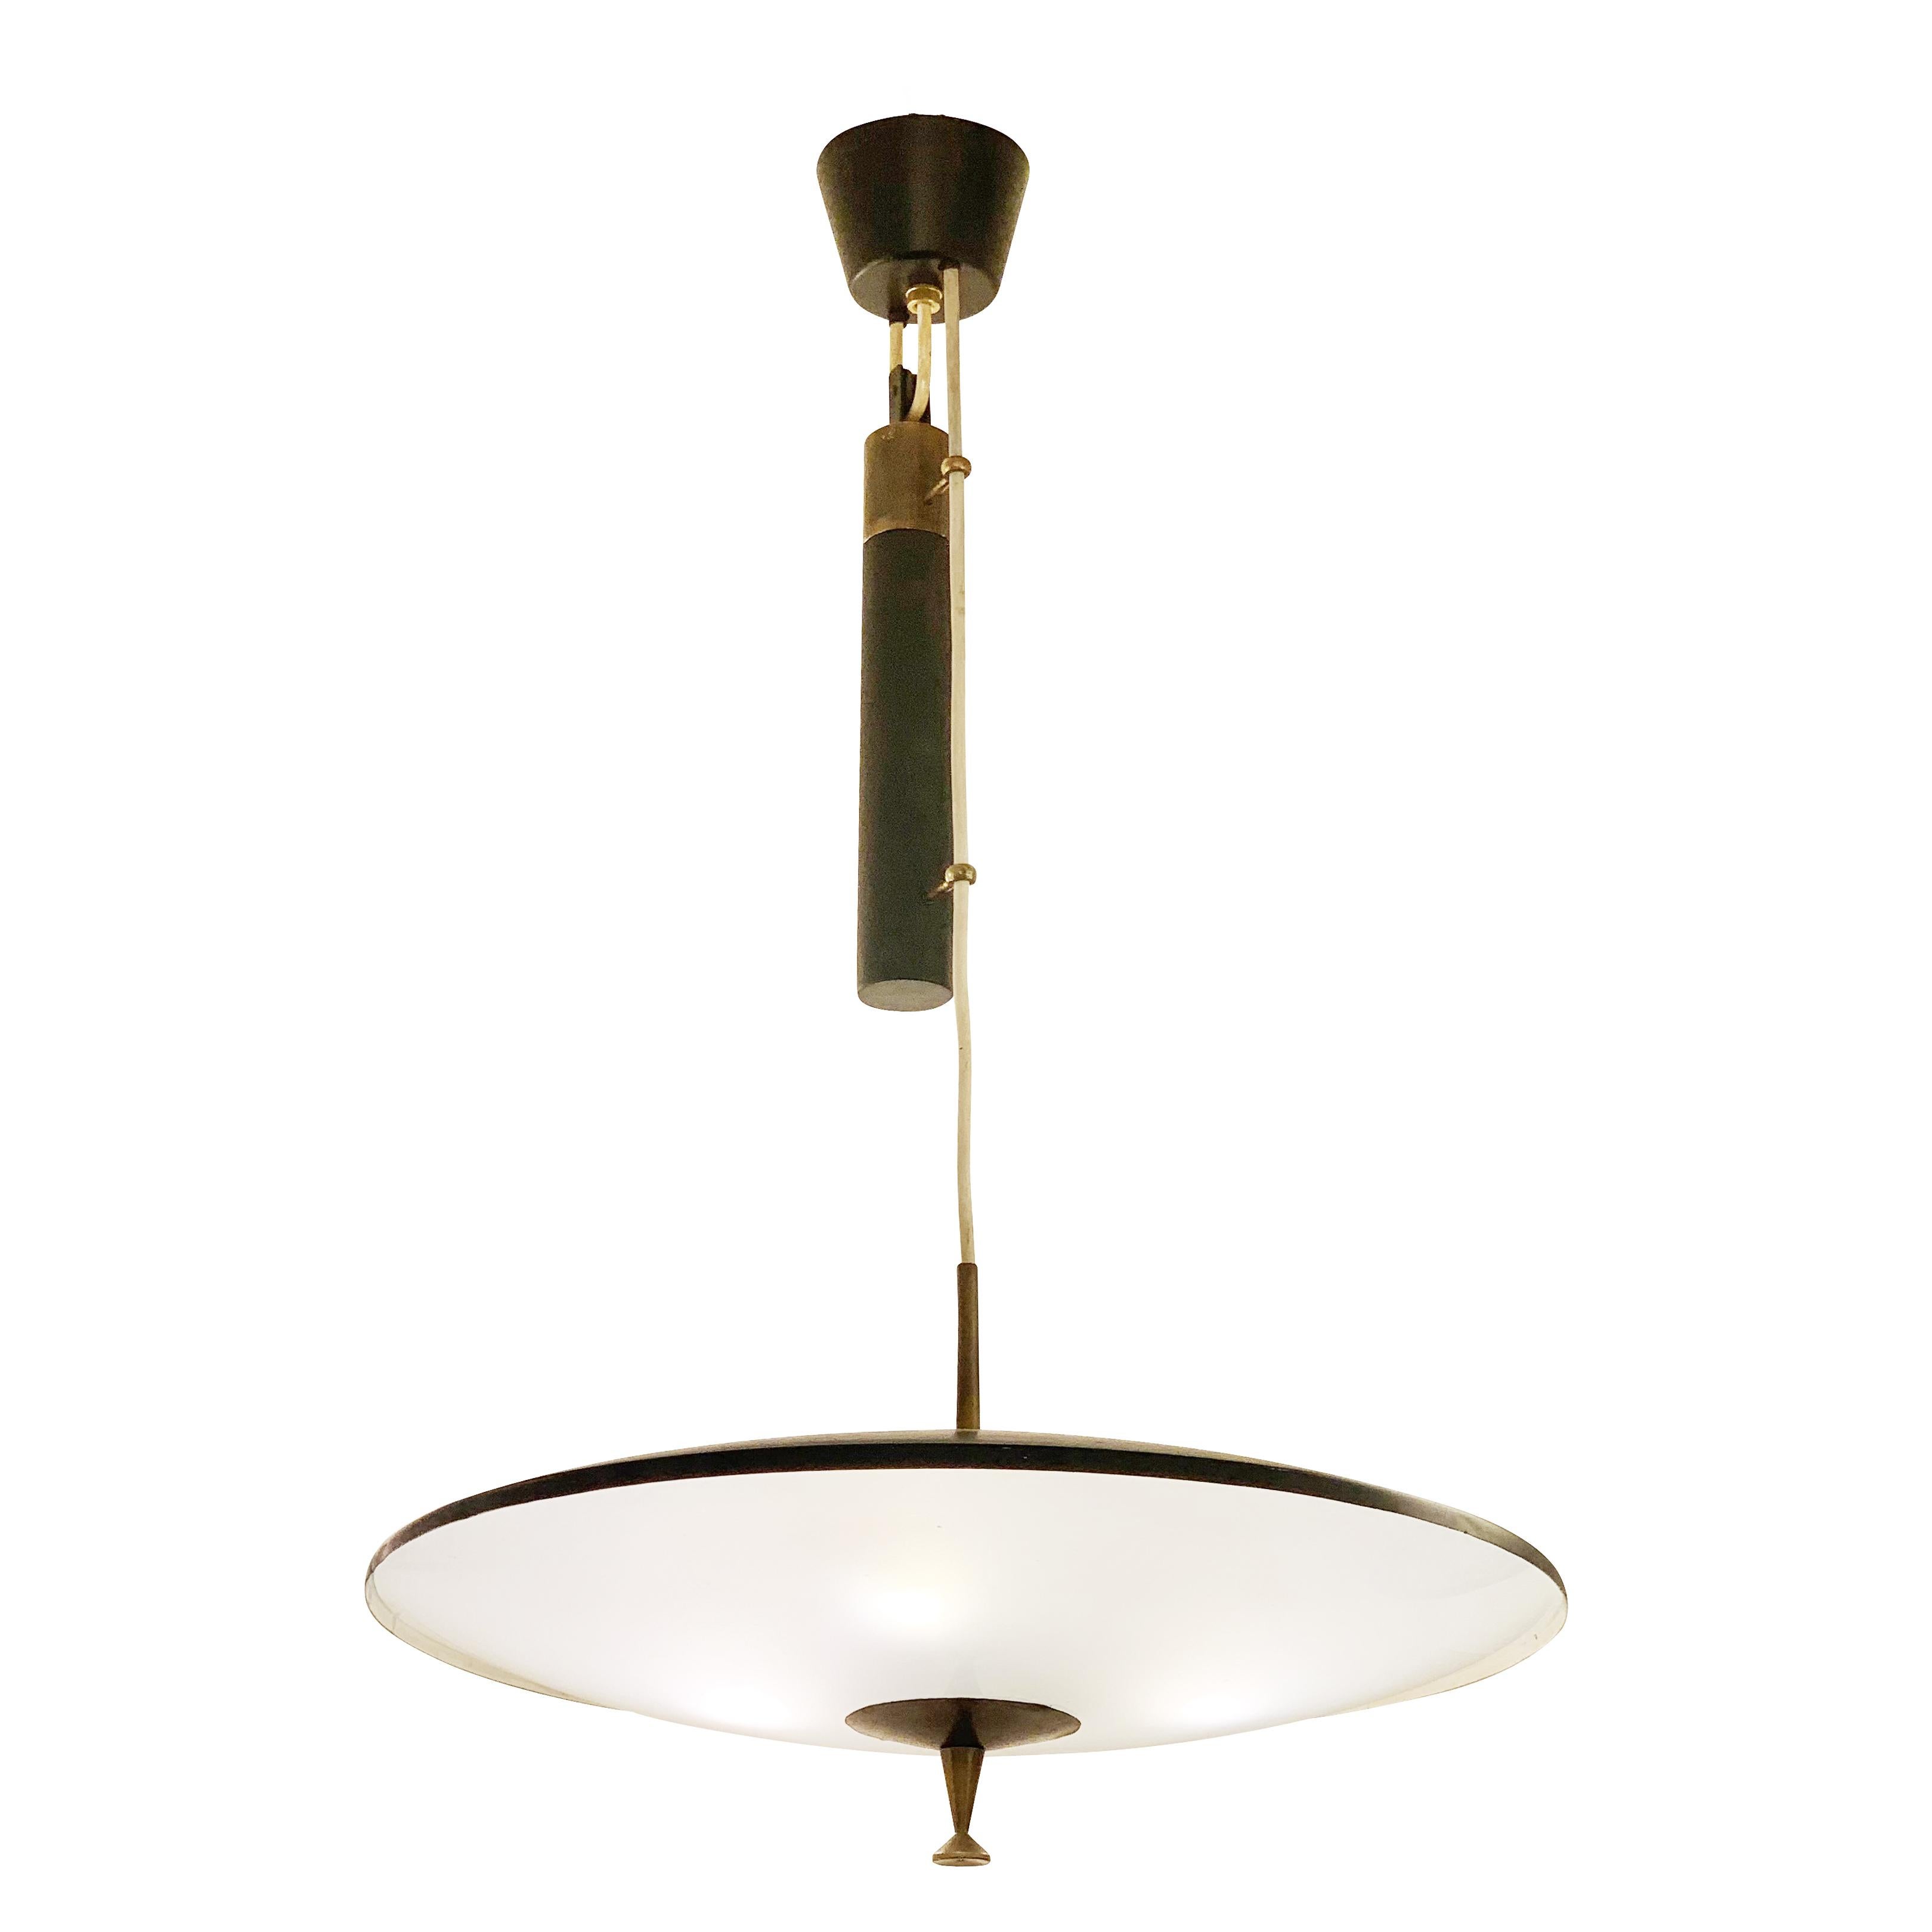 Italian Mid-Century pendant with a counter balance mechanism that allows for easy height adjustments. Black lacquered hardware with brass accents. The frosted glass diffuser conceals three light sources. 

Condition: Excellent vintage condition,